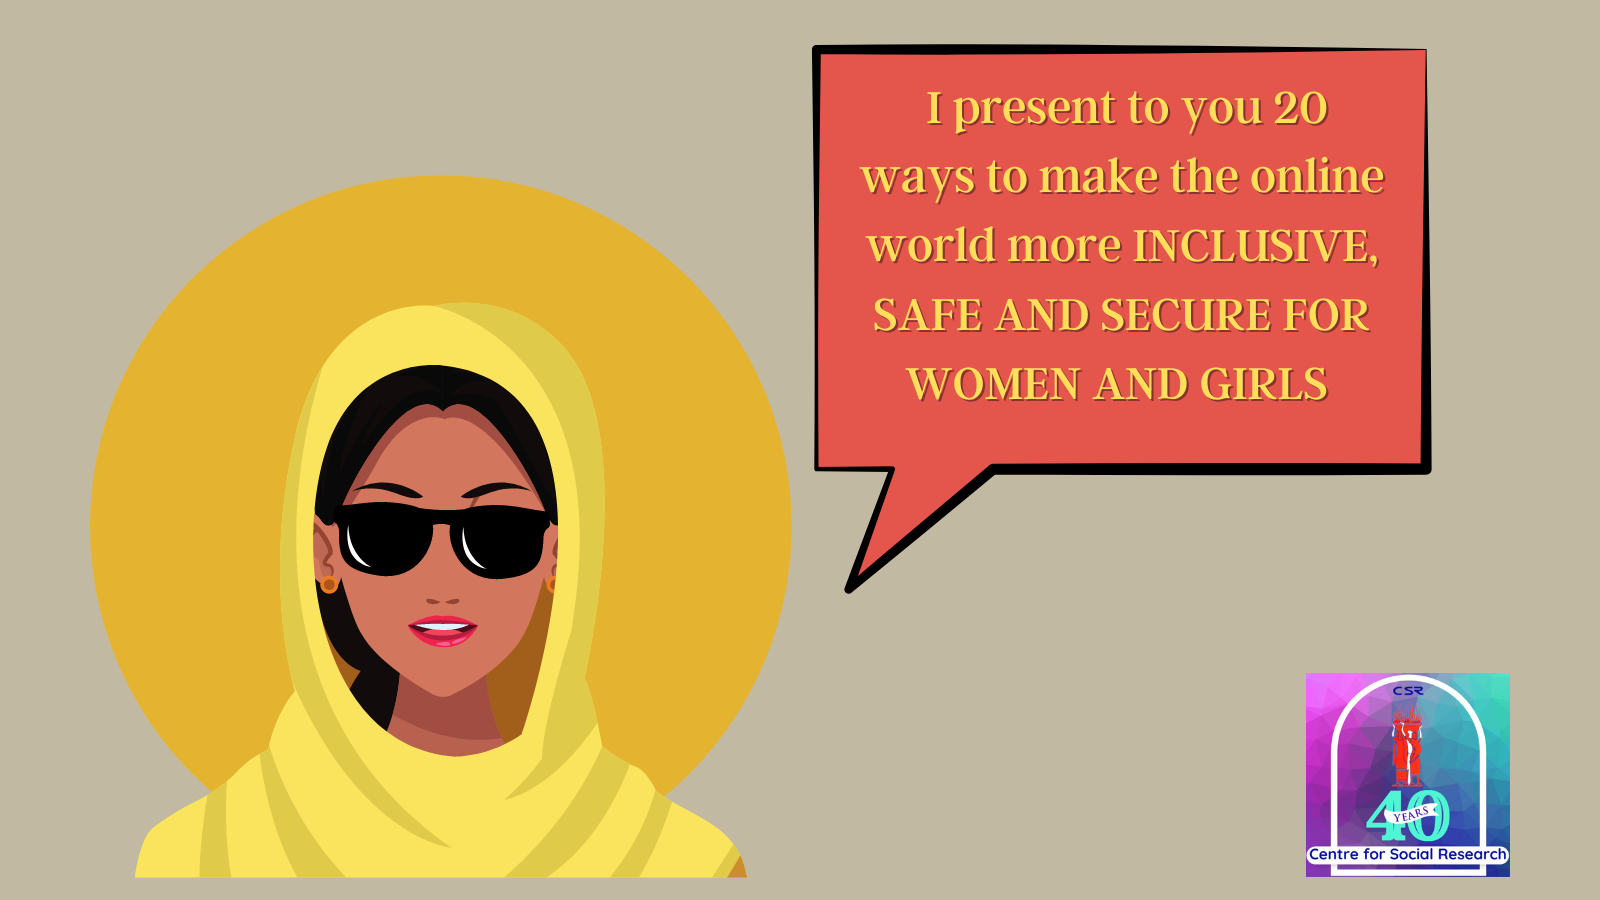 Chat GPT shares 20 ways to make the online world more INCLUSIVE, SAFE AND SECURE FOR WOMEN AND GIRLS